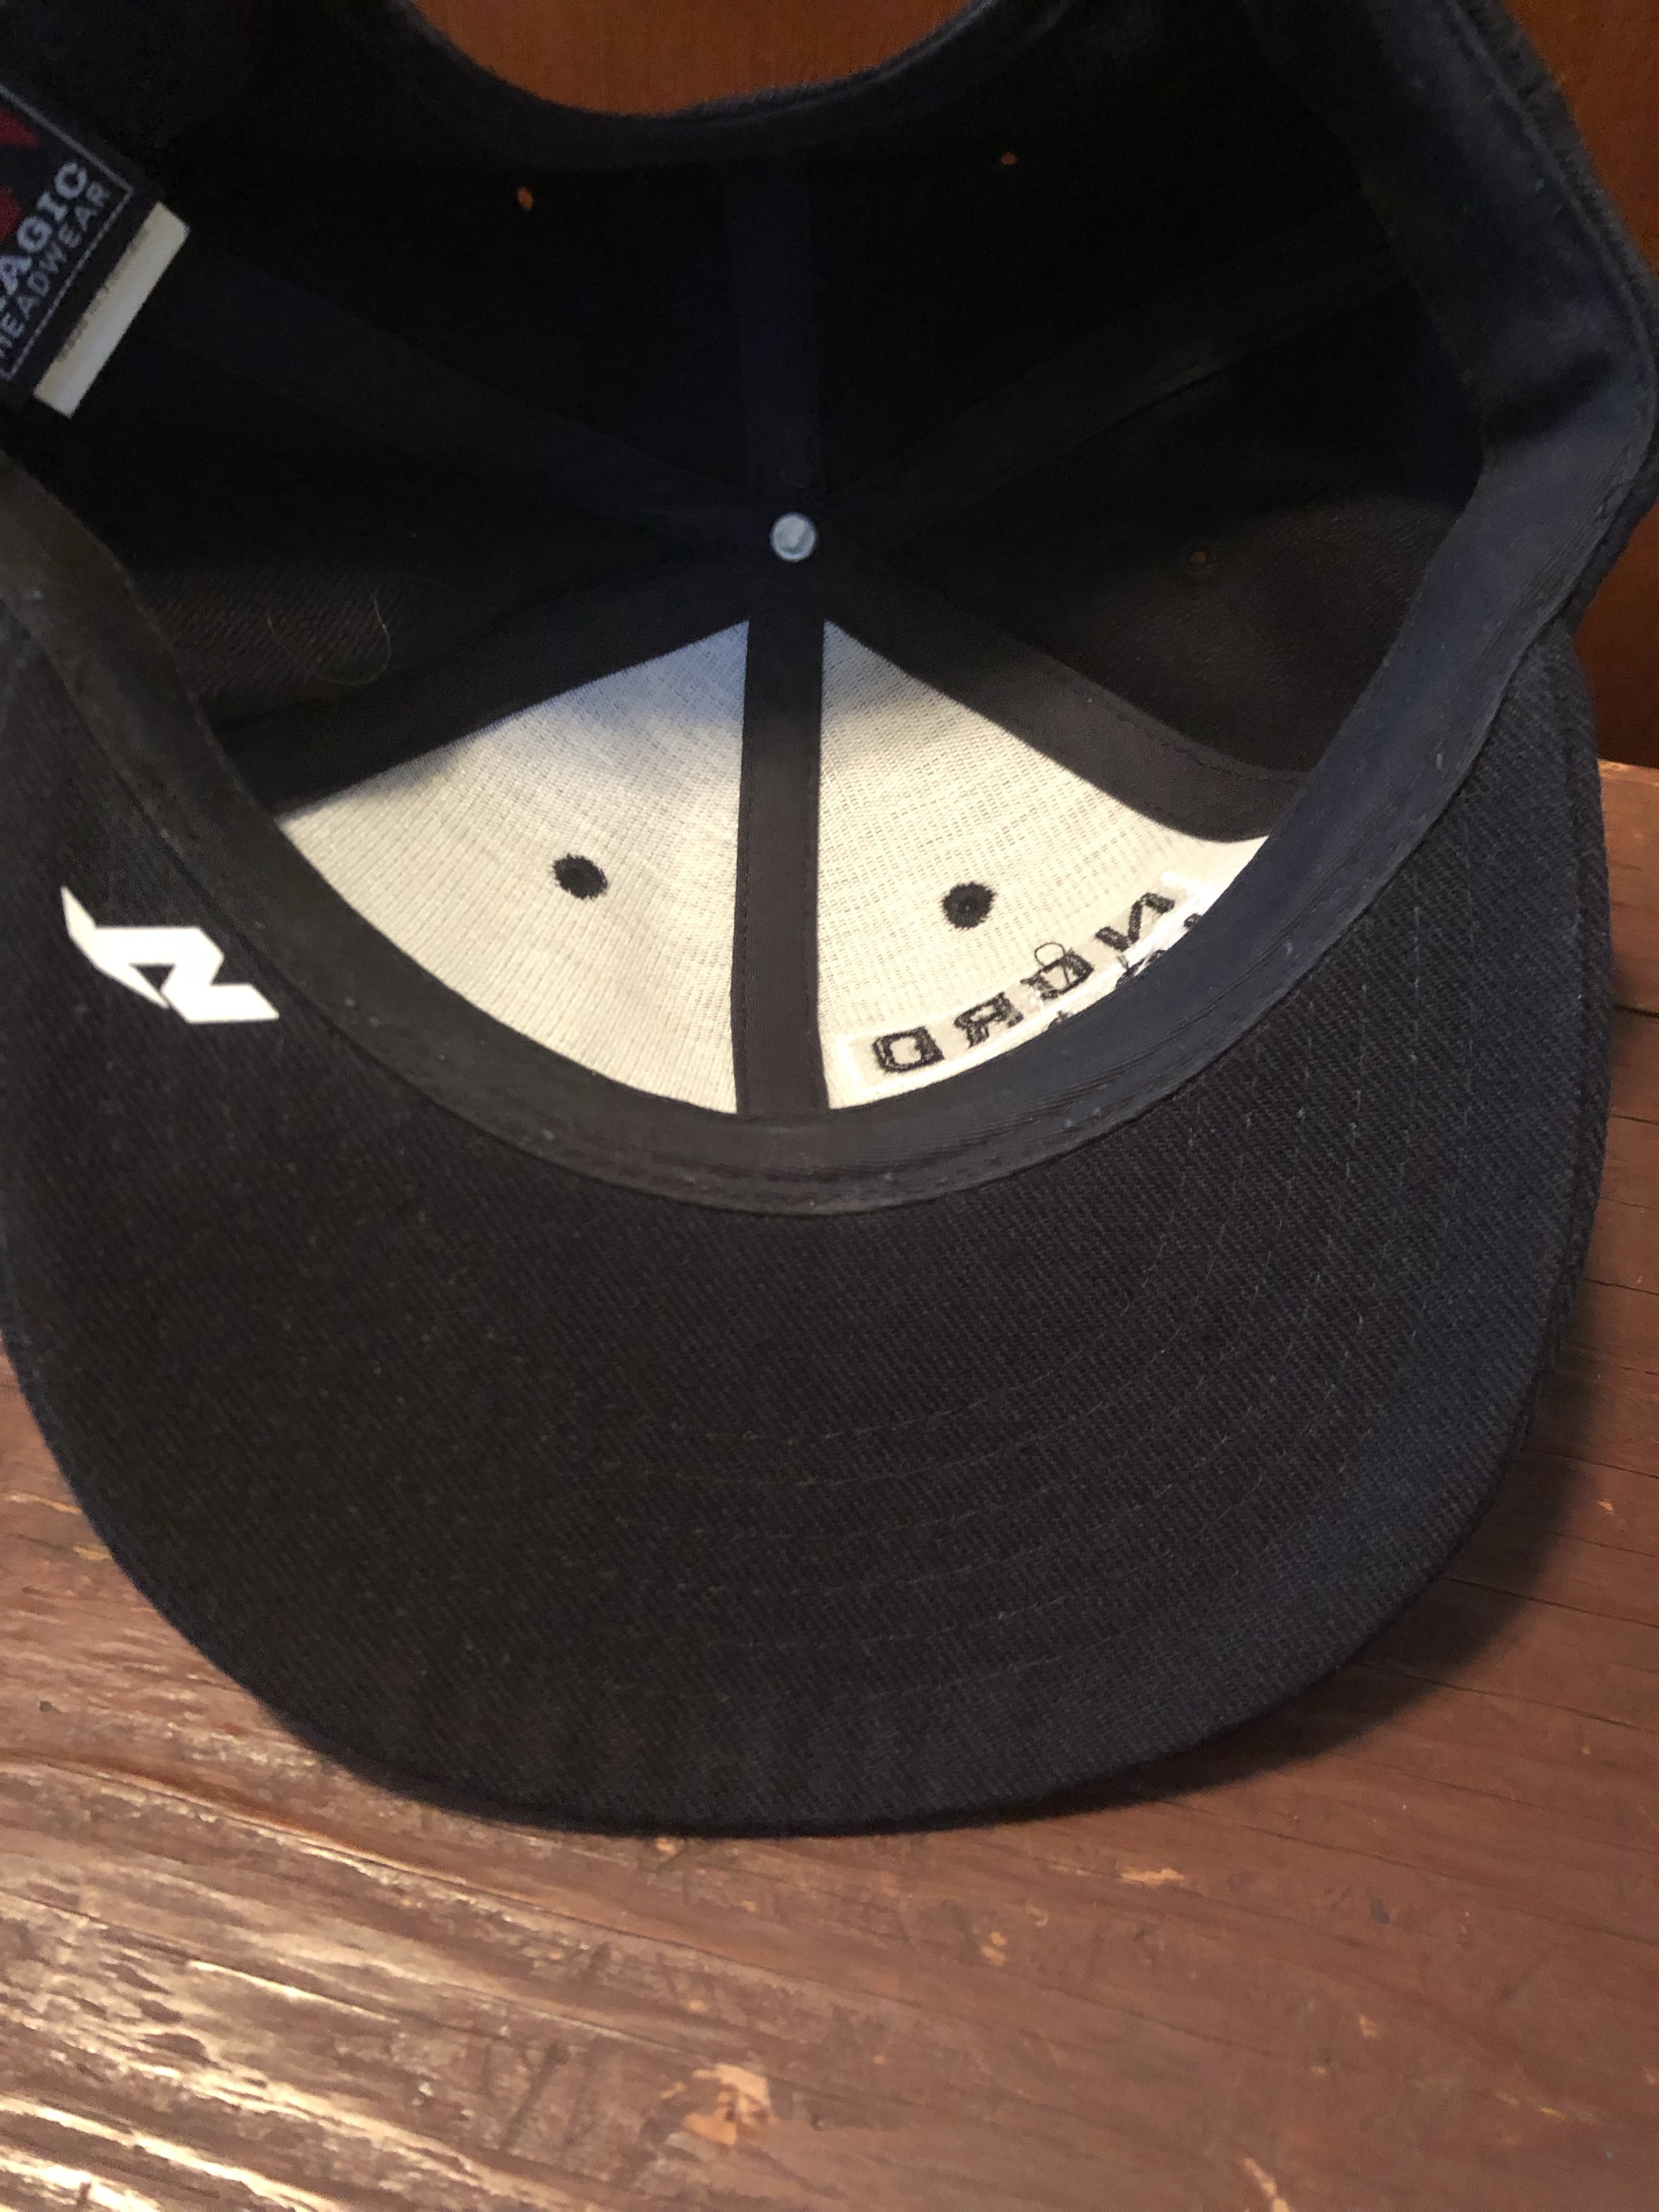 Nordica Hat - Black, Snapback - Sell and Trade - Newschoolers.com